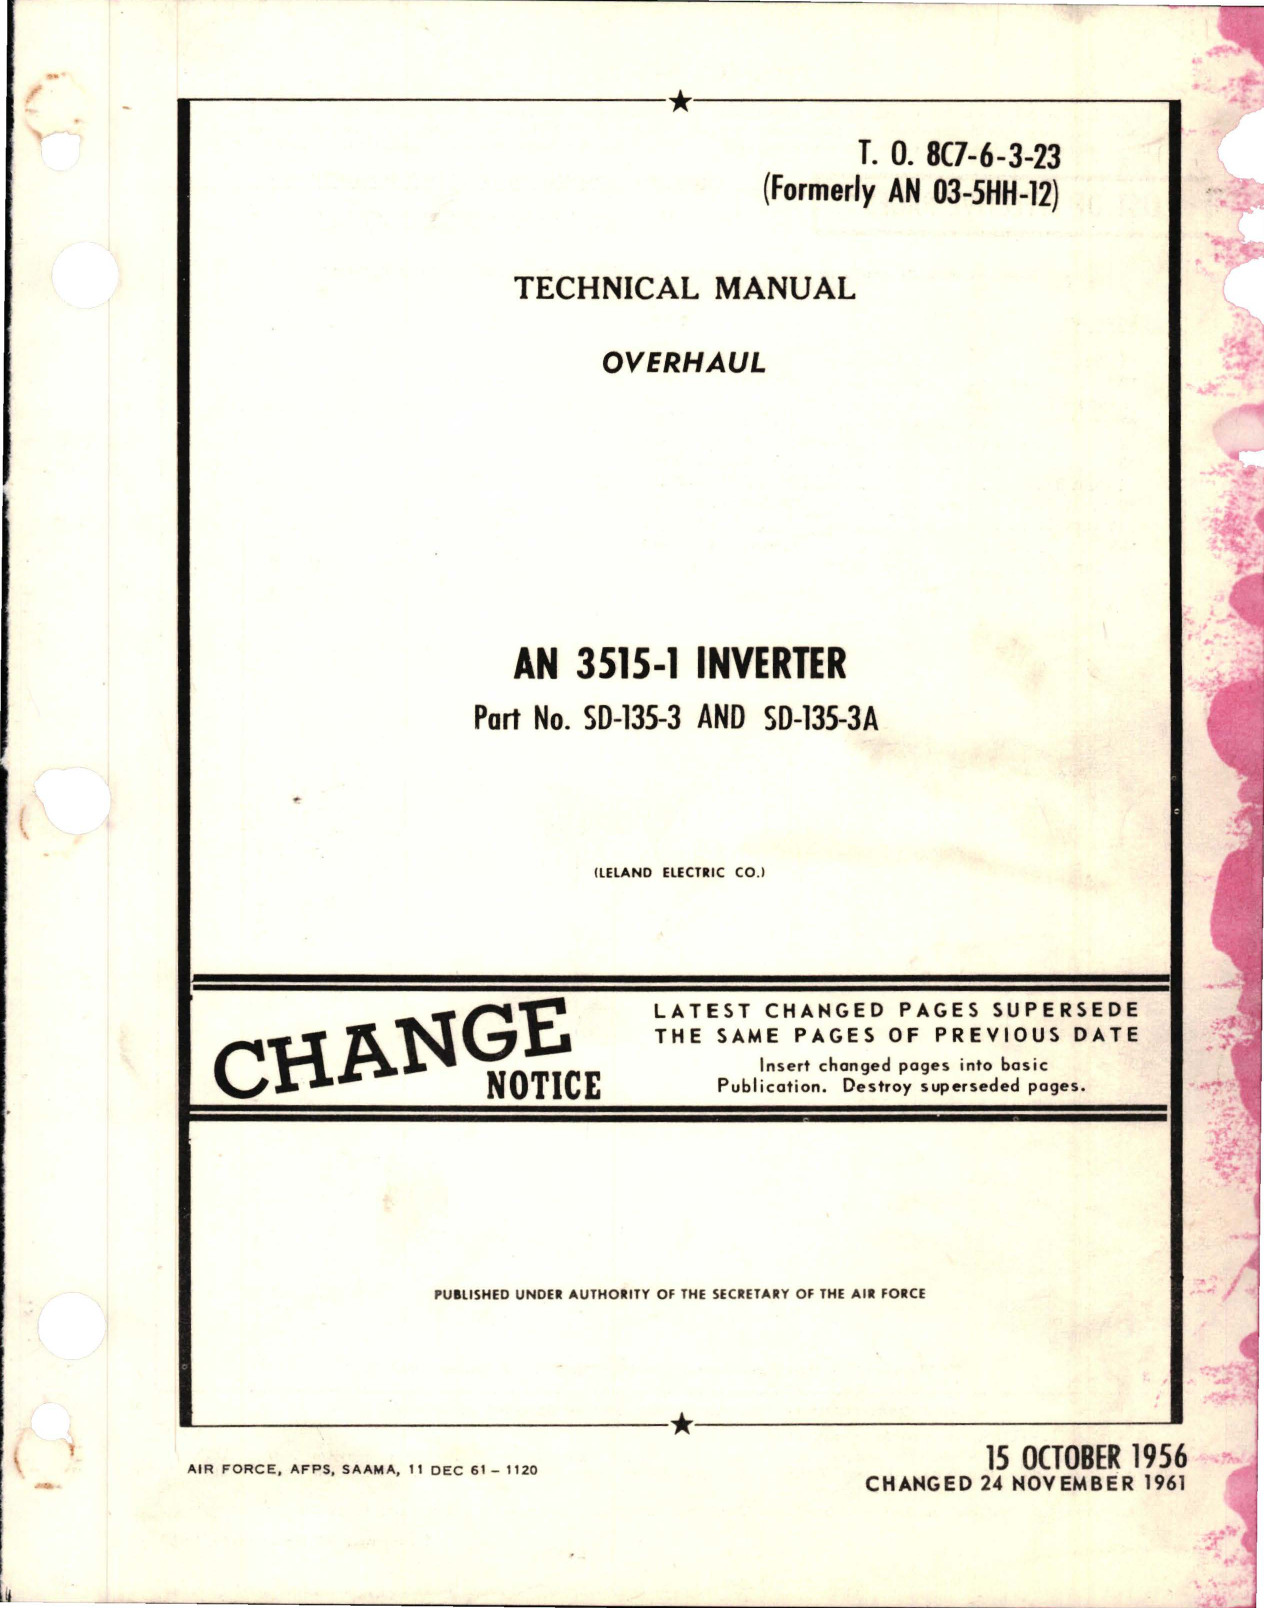 Sample page 1 from AirCorps Library document: Overhaul for Inverter - AN 3515-1 - Part SD-135-3 and SD-135-3A